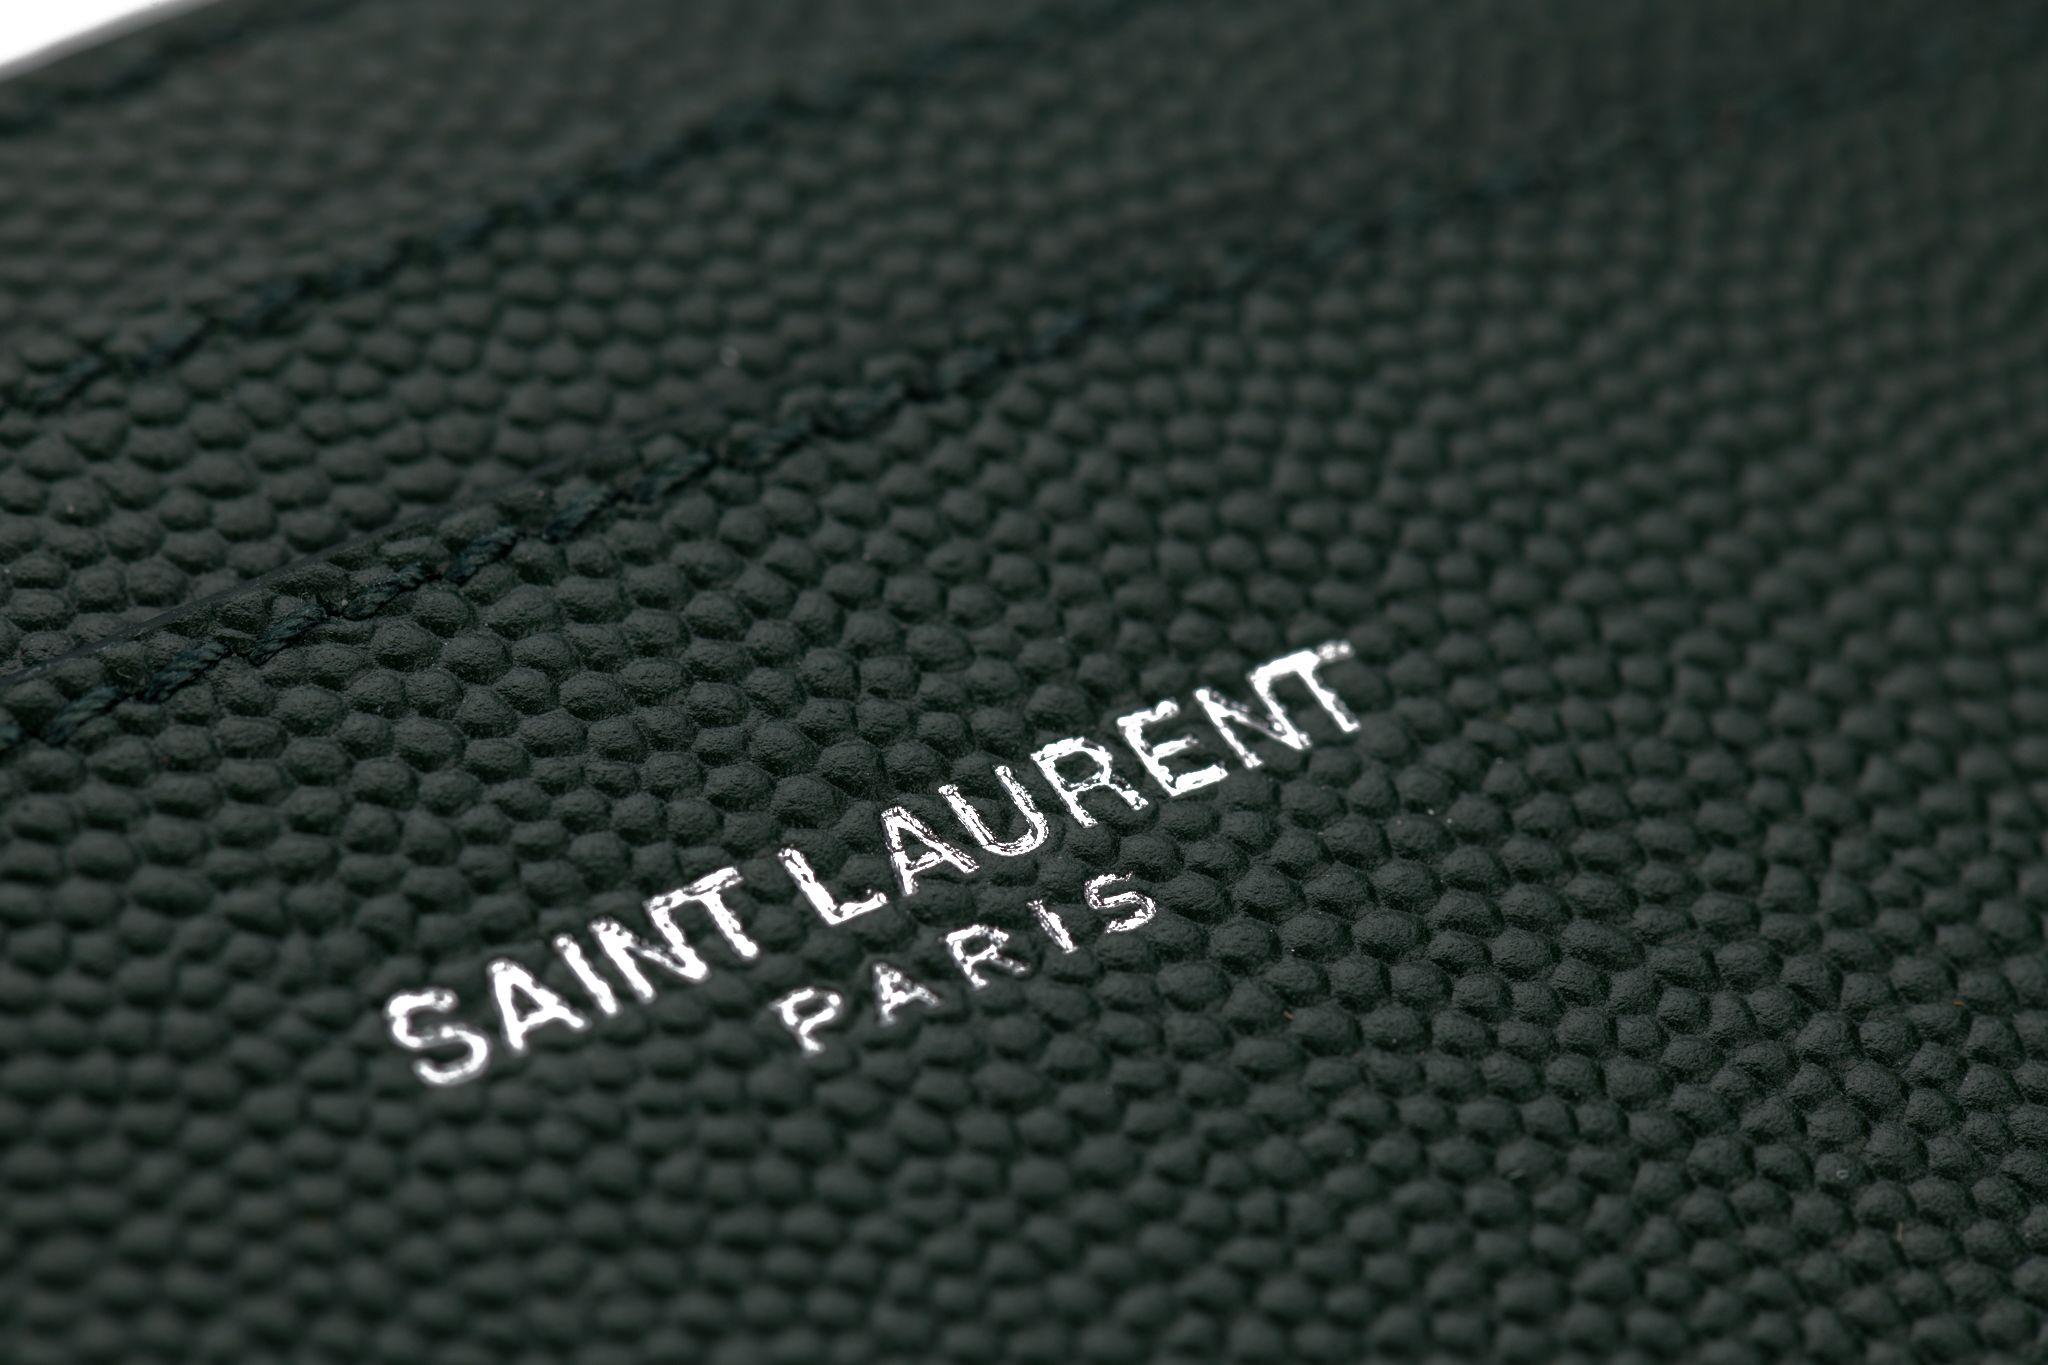 YSL brand new forest green pebbled leather unisex credit card wallet. 
Comes with booklet, original dustcover and box.